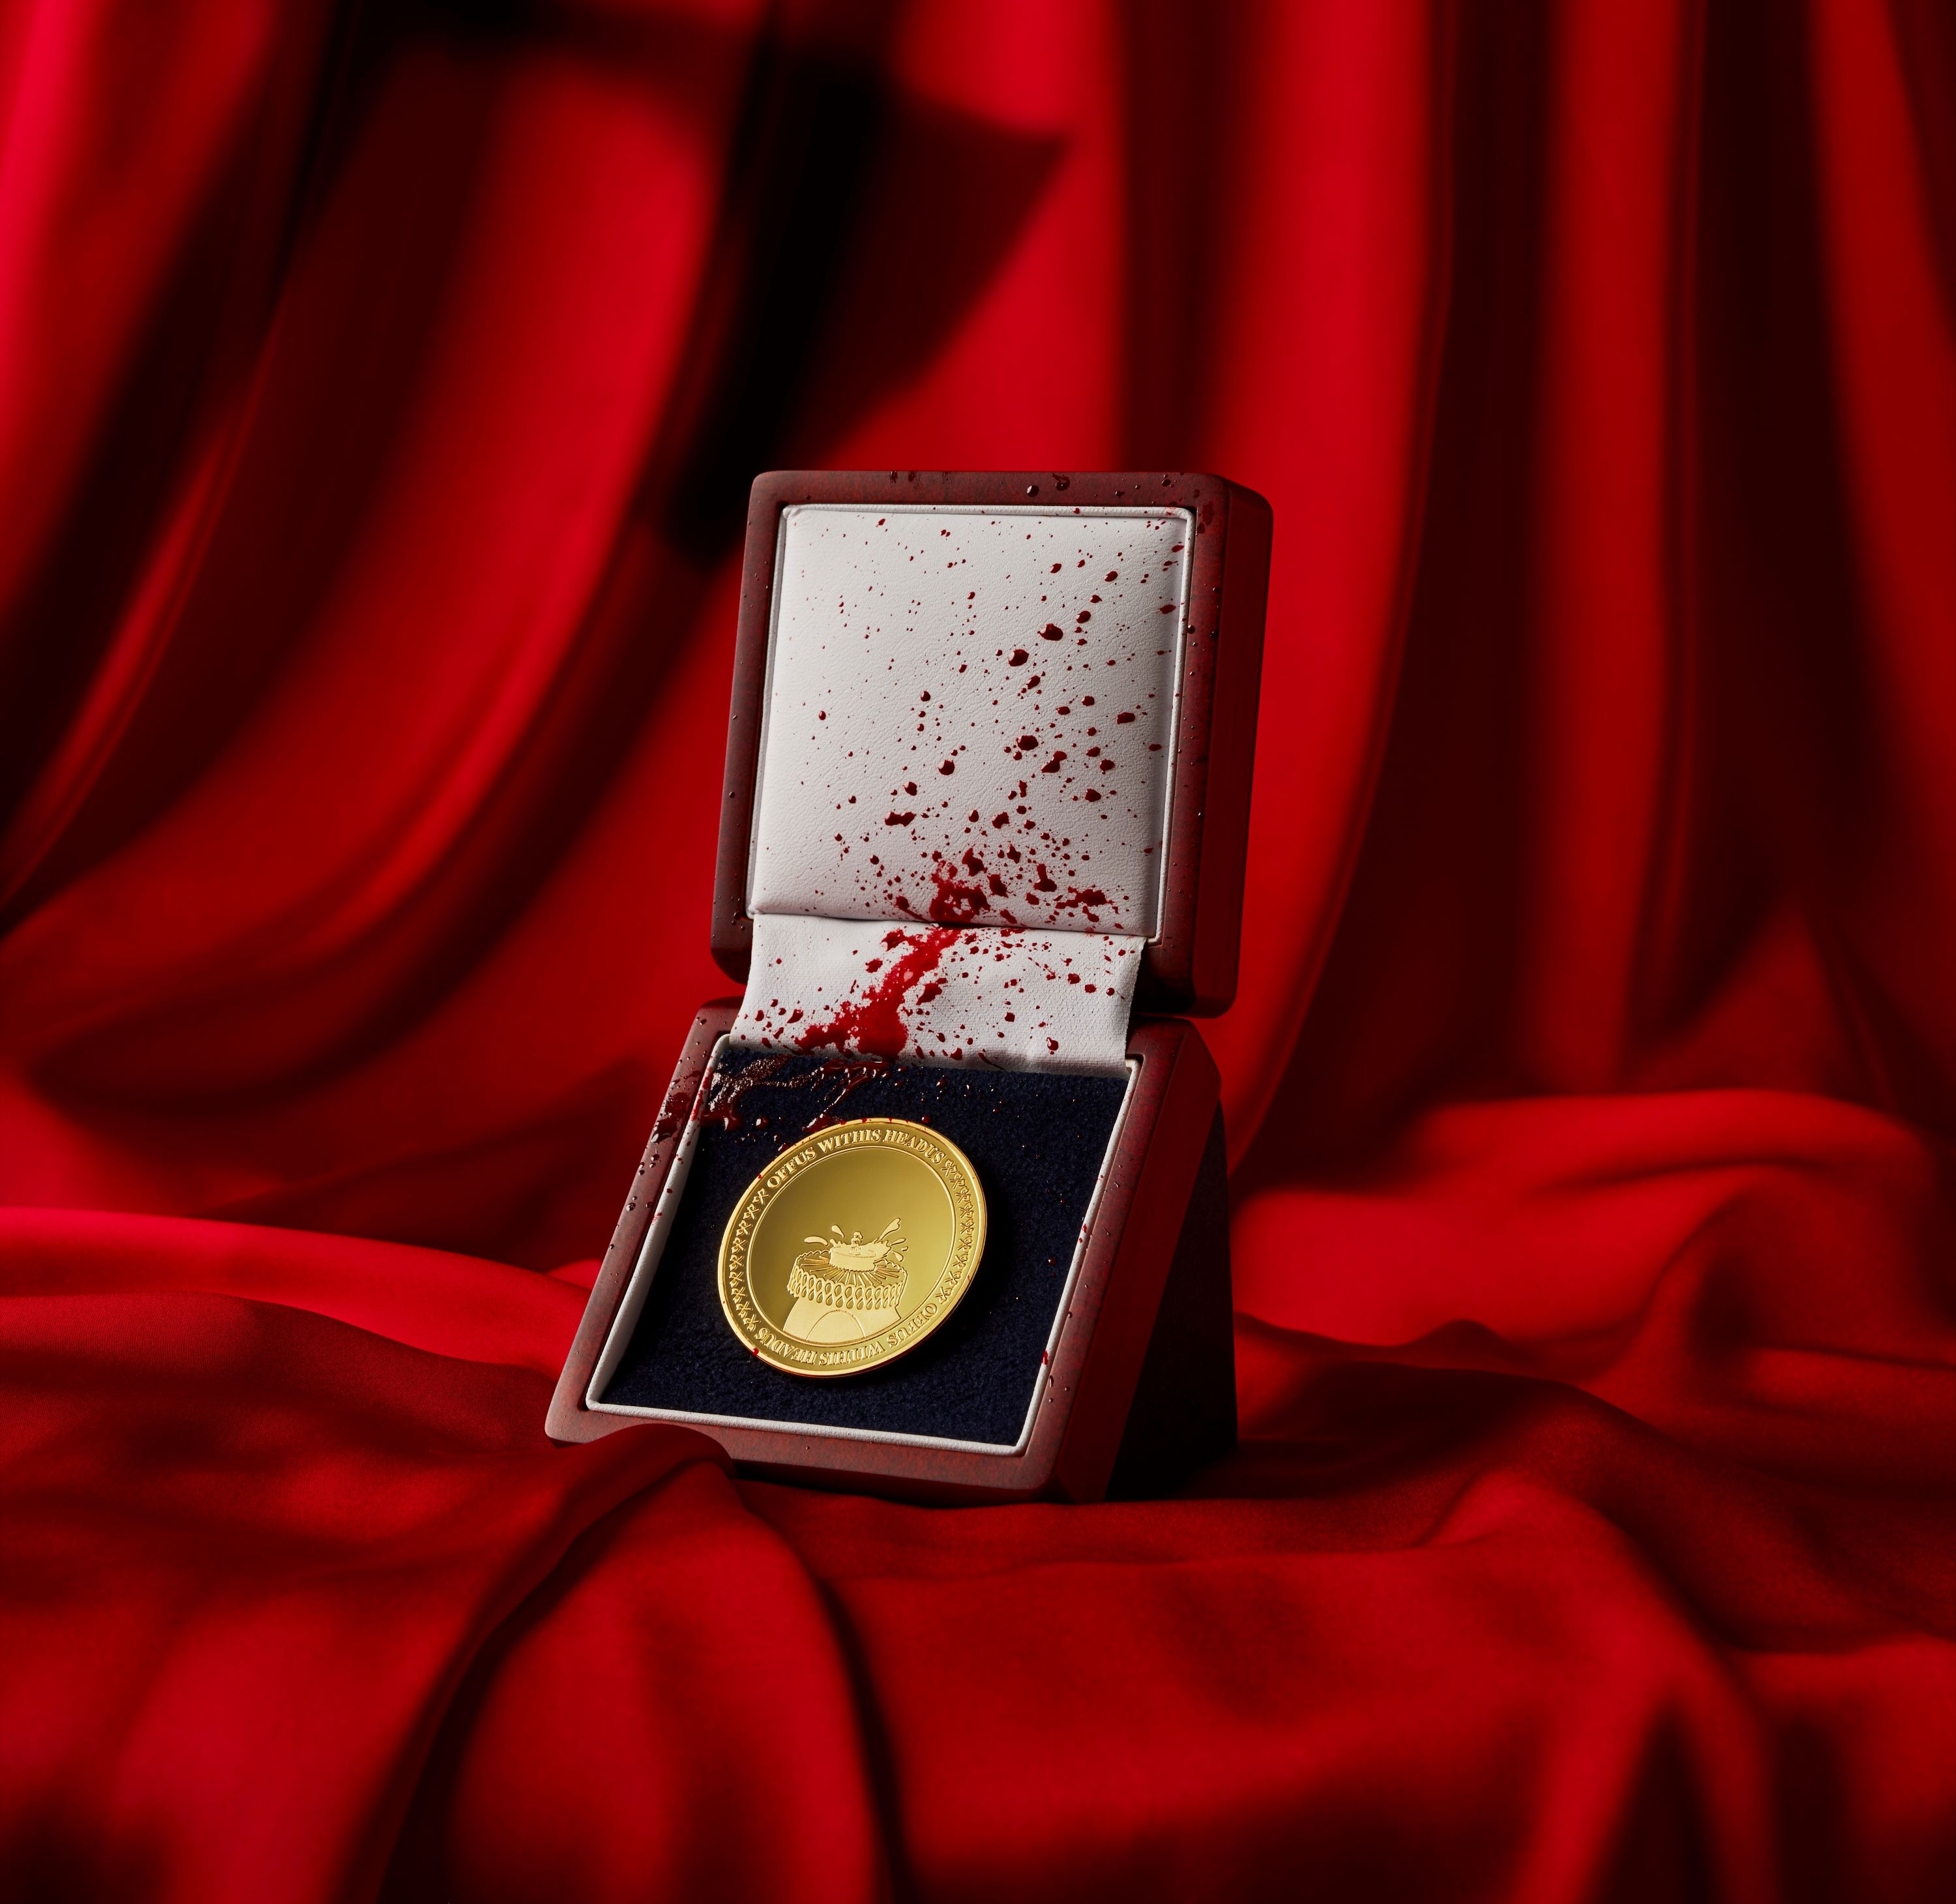 Image showing the new headed or beheaded coin from the London Dungeon's new show Rotten Royals. The London Dungeon is a popular tourist attraction in London that offers a variety of interactive experiences based on London's history)